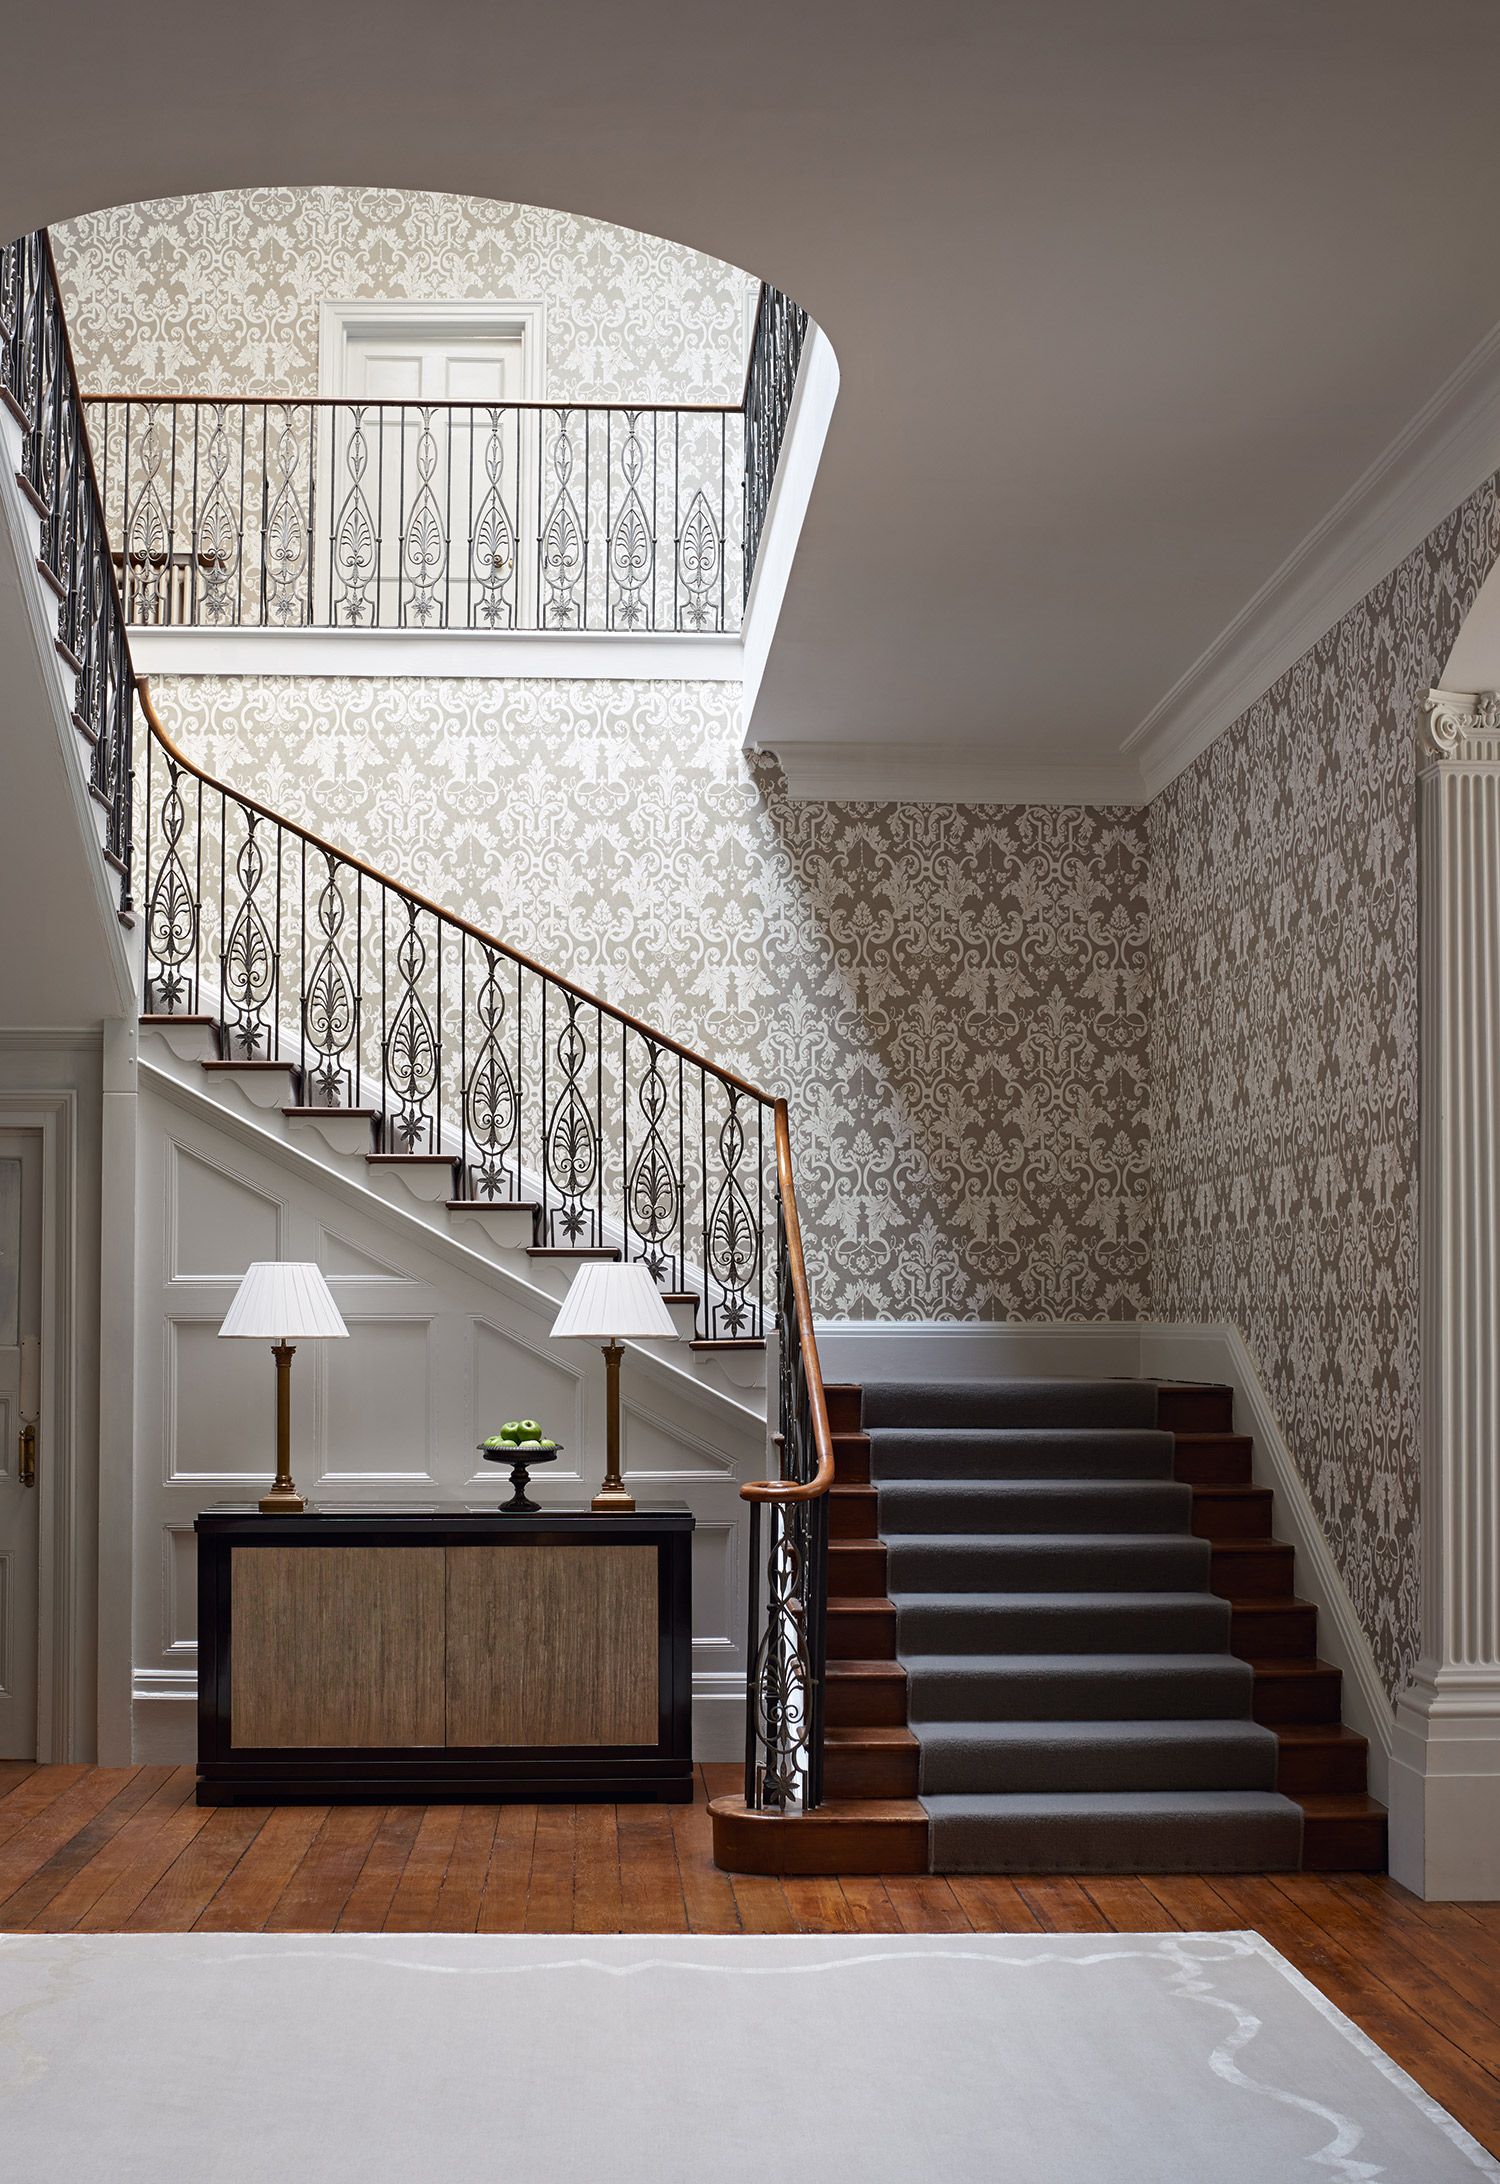 Hall Stairs And Landing Wallpaper Stairway Stair